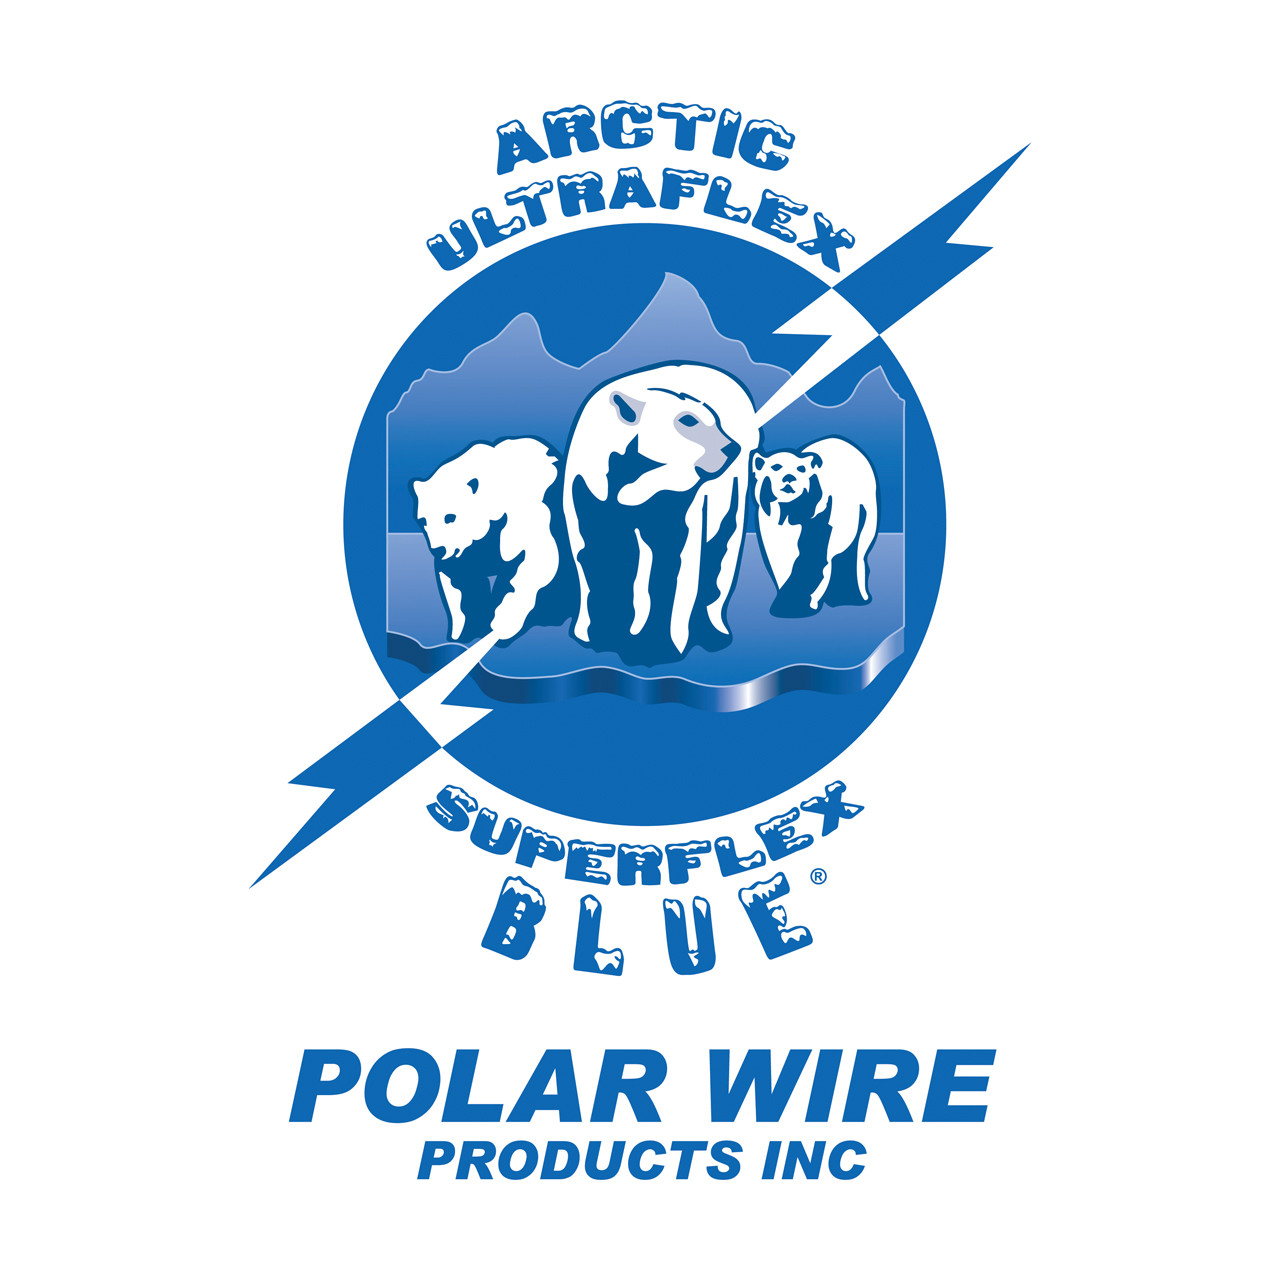 Arctic Ultraflex Blue®  100% copper Class K fine stranded cold weather flexible wire is manufactured exclusively by Polar Wire Products. Made in the USA